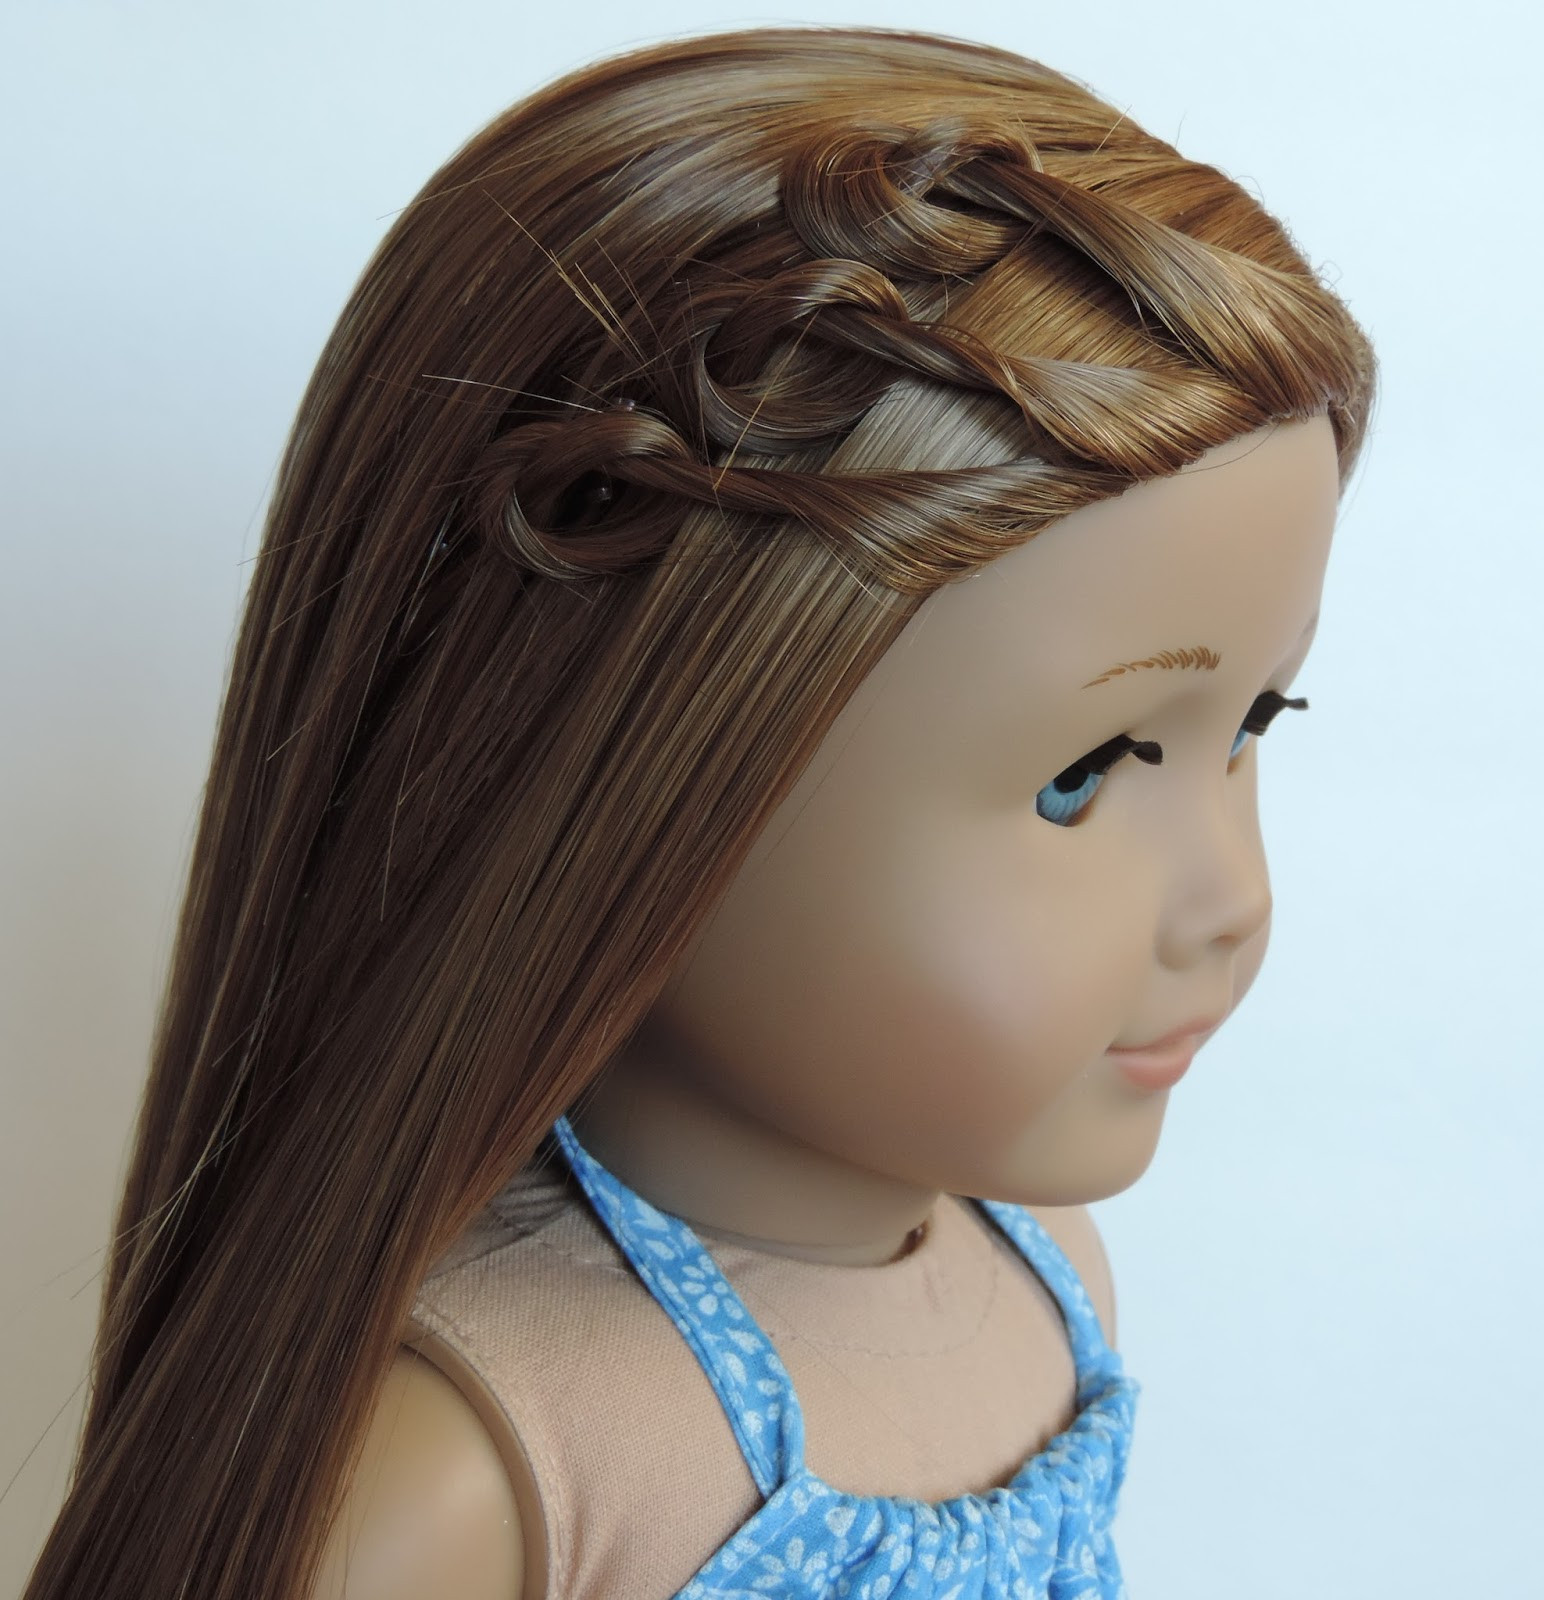 American Girl Hairstyle
 Cute American Girl Doll Hairstyles trends hairstyle